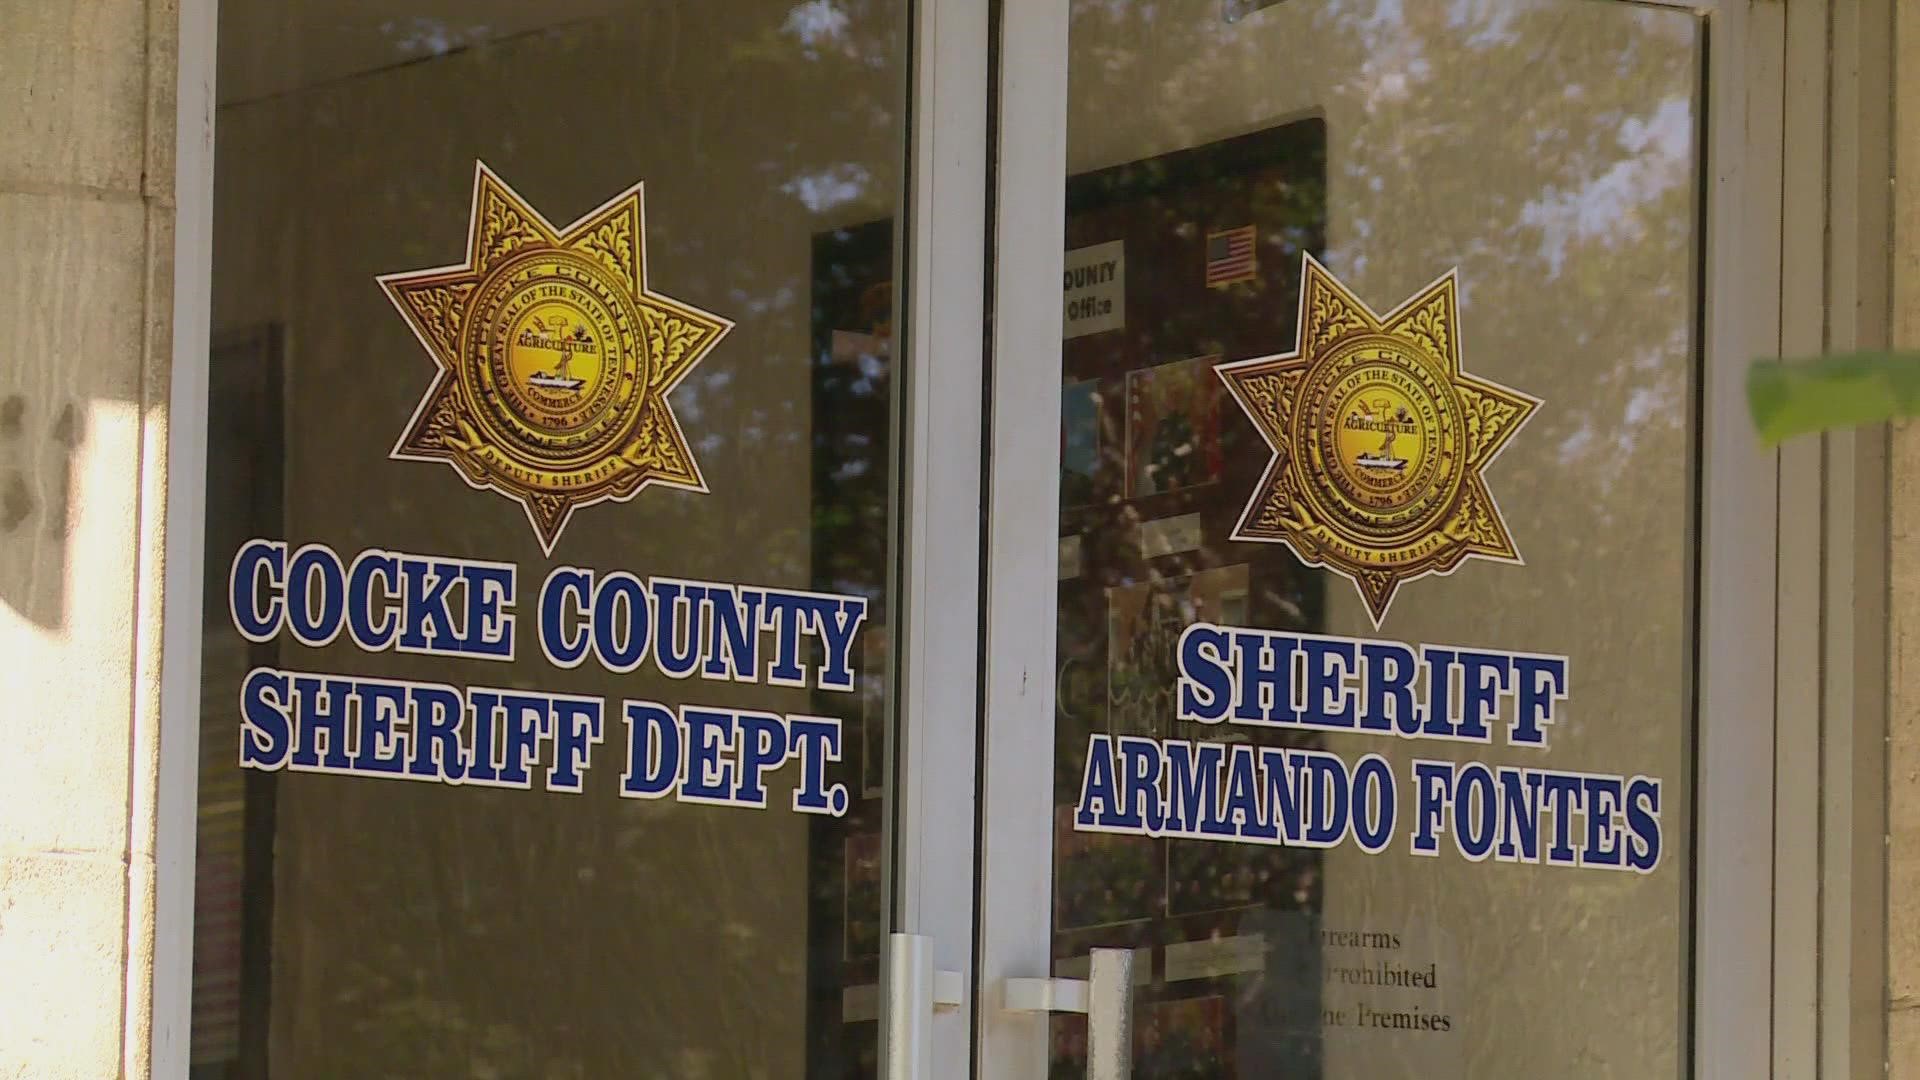 The sheriff's office said some indictments were not served during "Operation Friday the 13th" due to changes in addresses or people not being found.